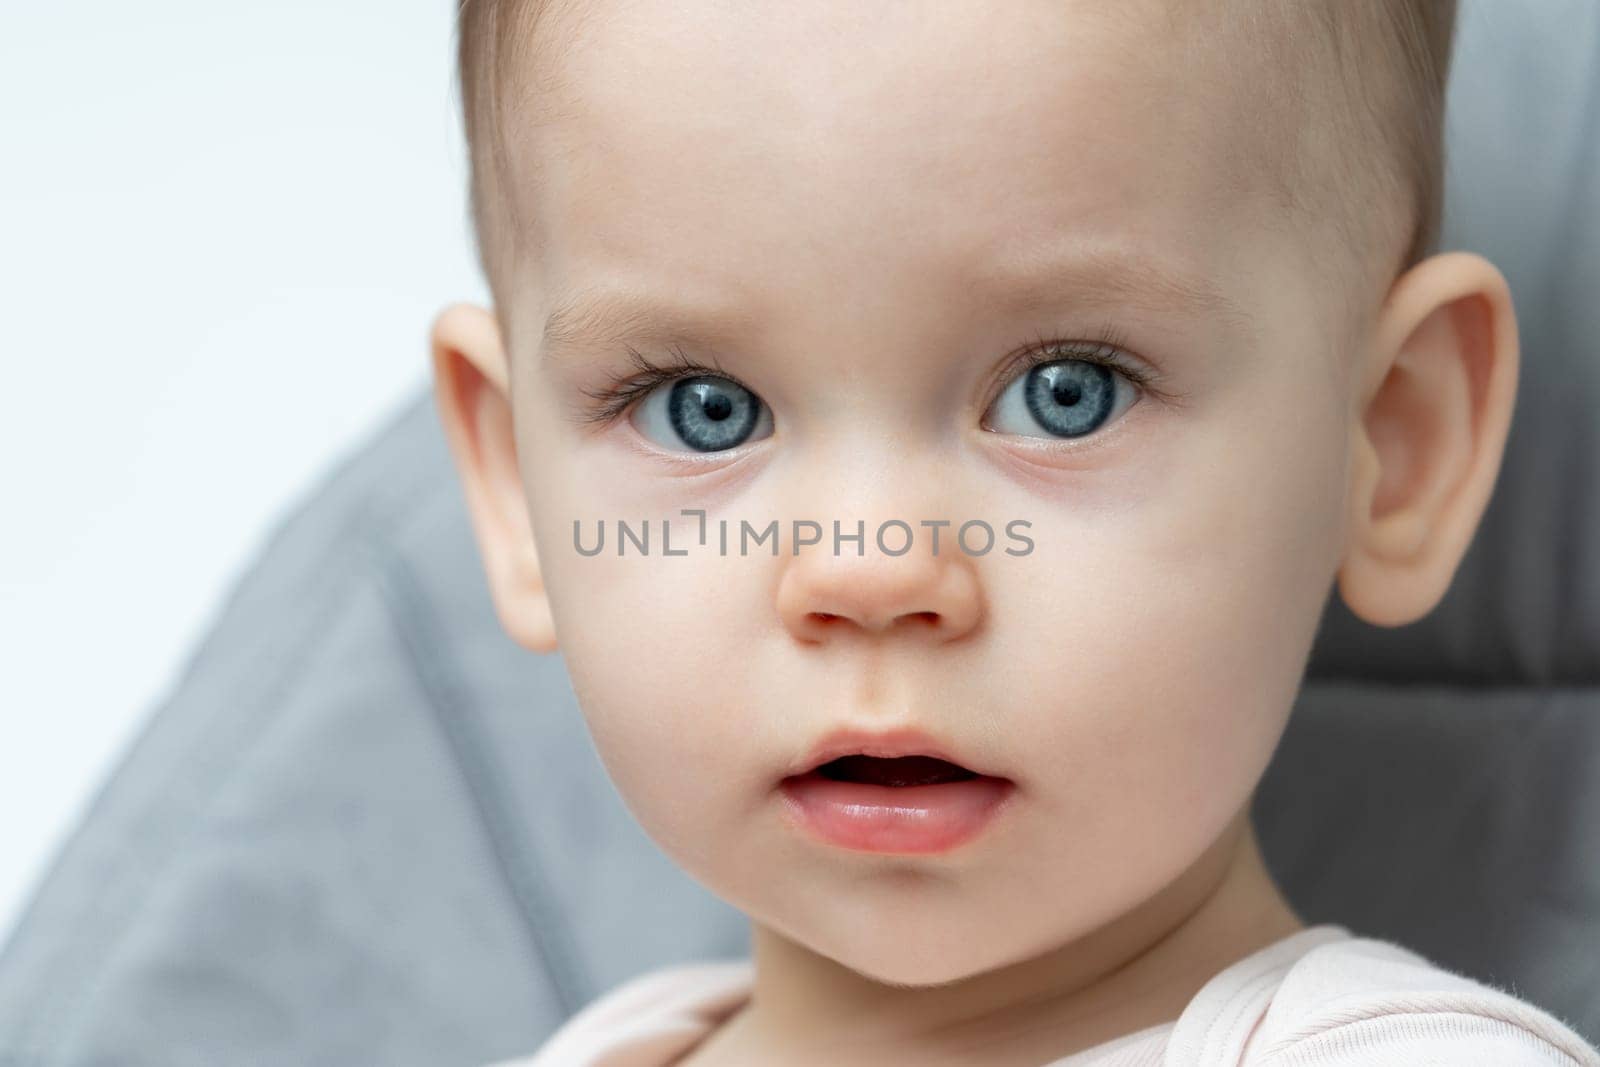 A happy baby with blue eyes is sitting in a high chair, smiling at the camera by Mariakray